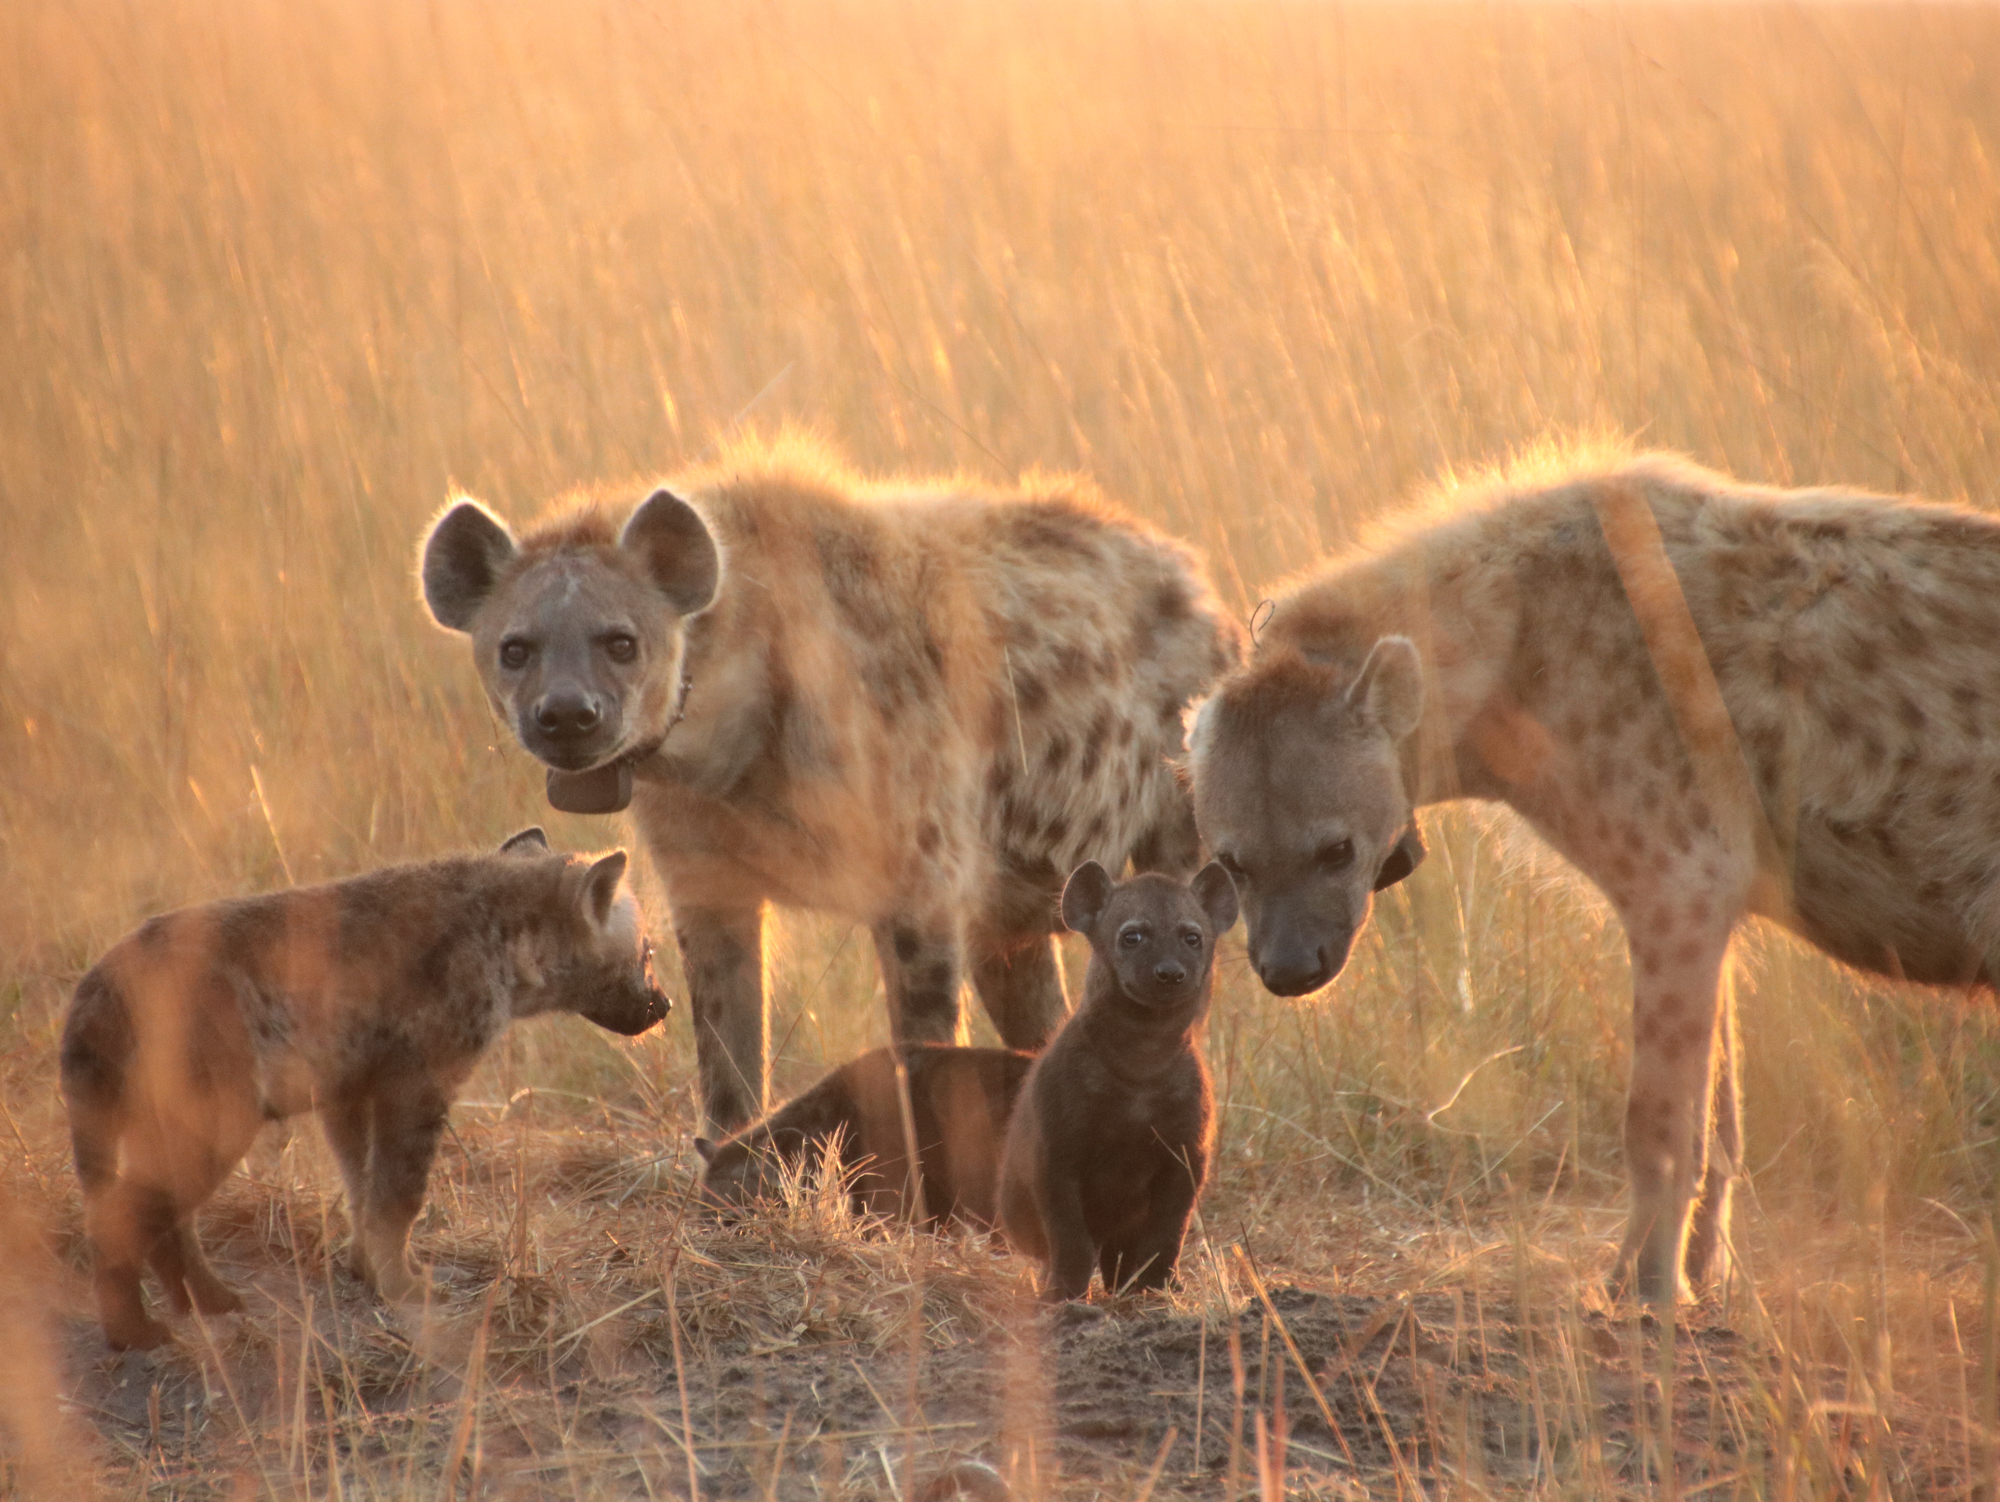 A group of hyenas photographed in golden light.